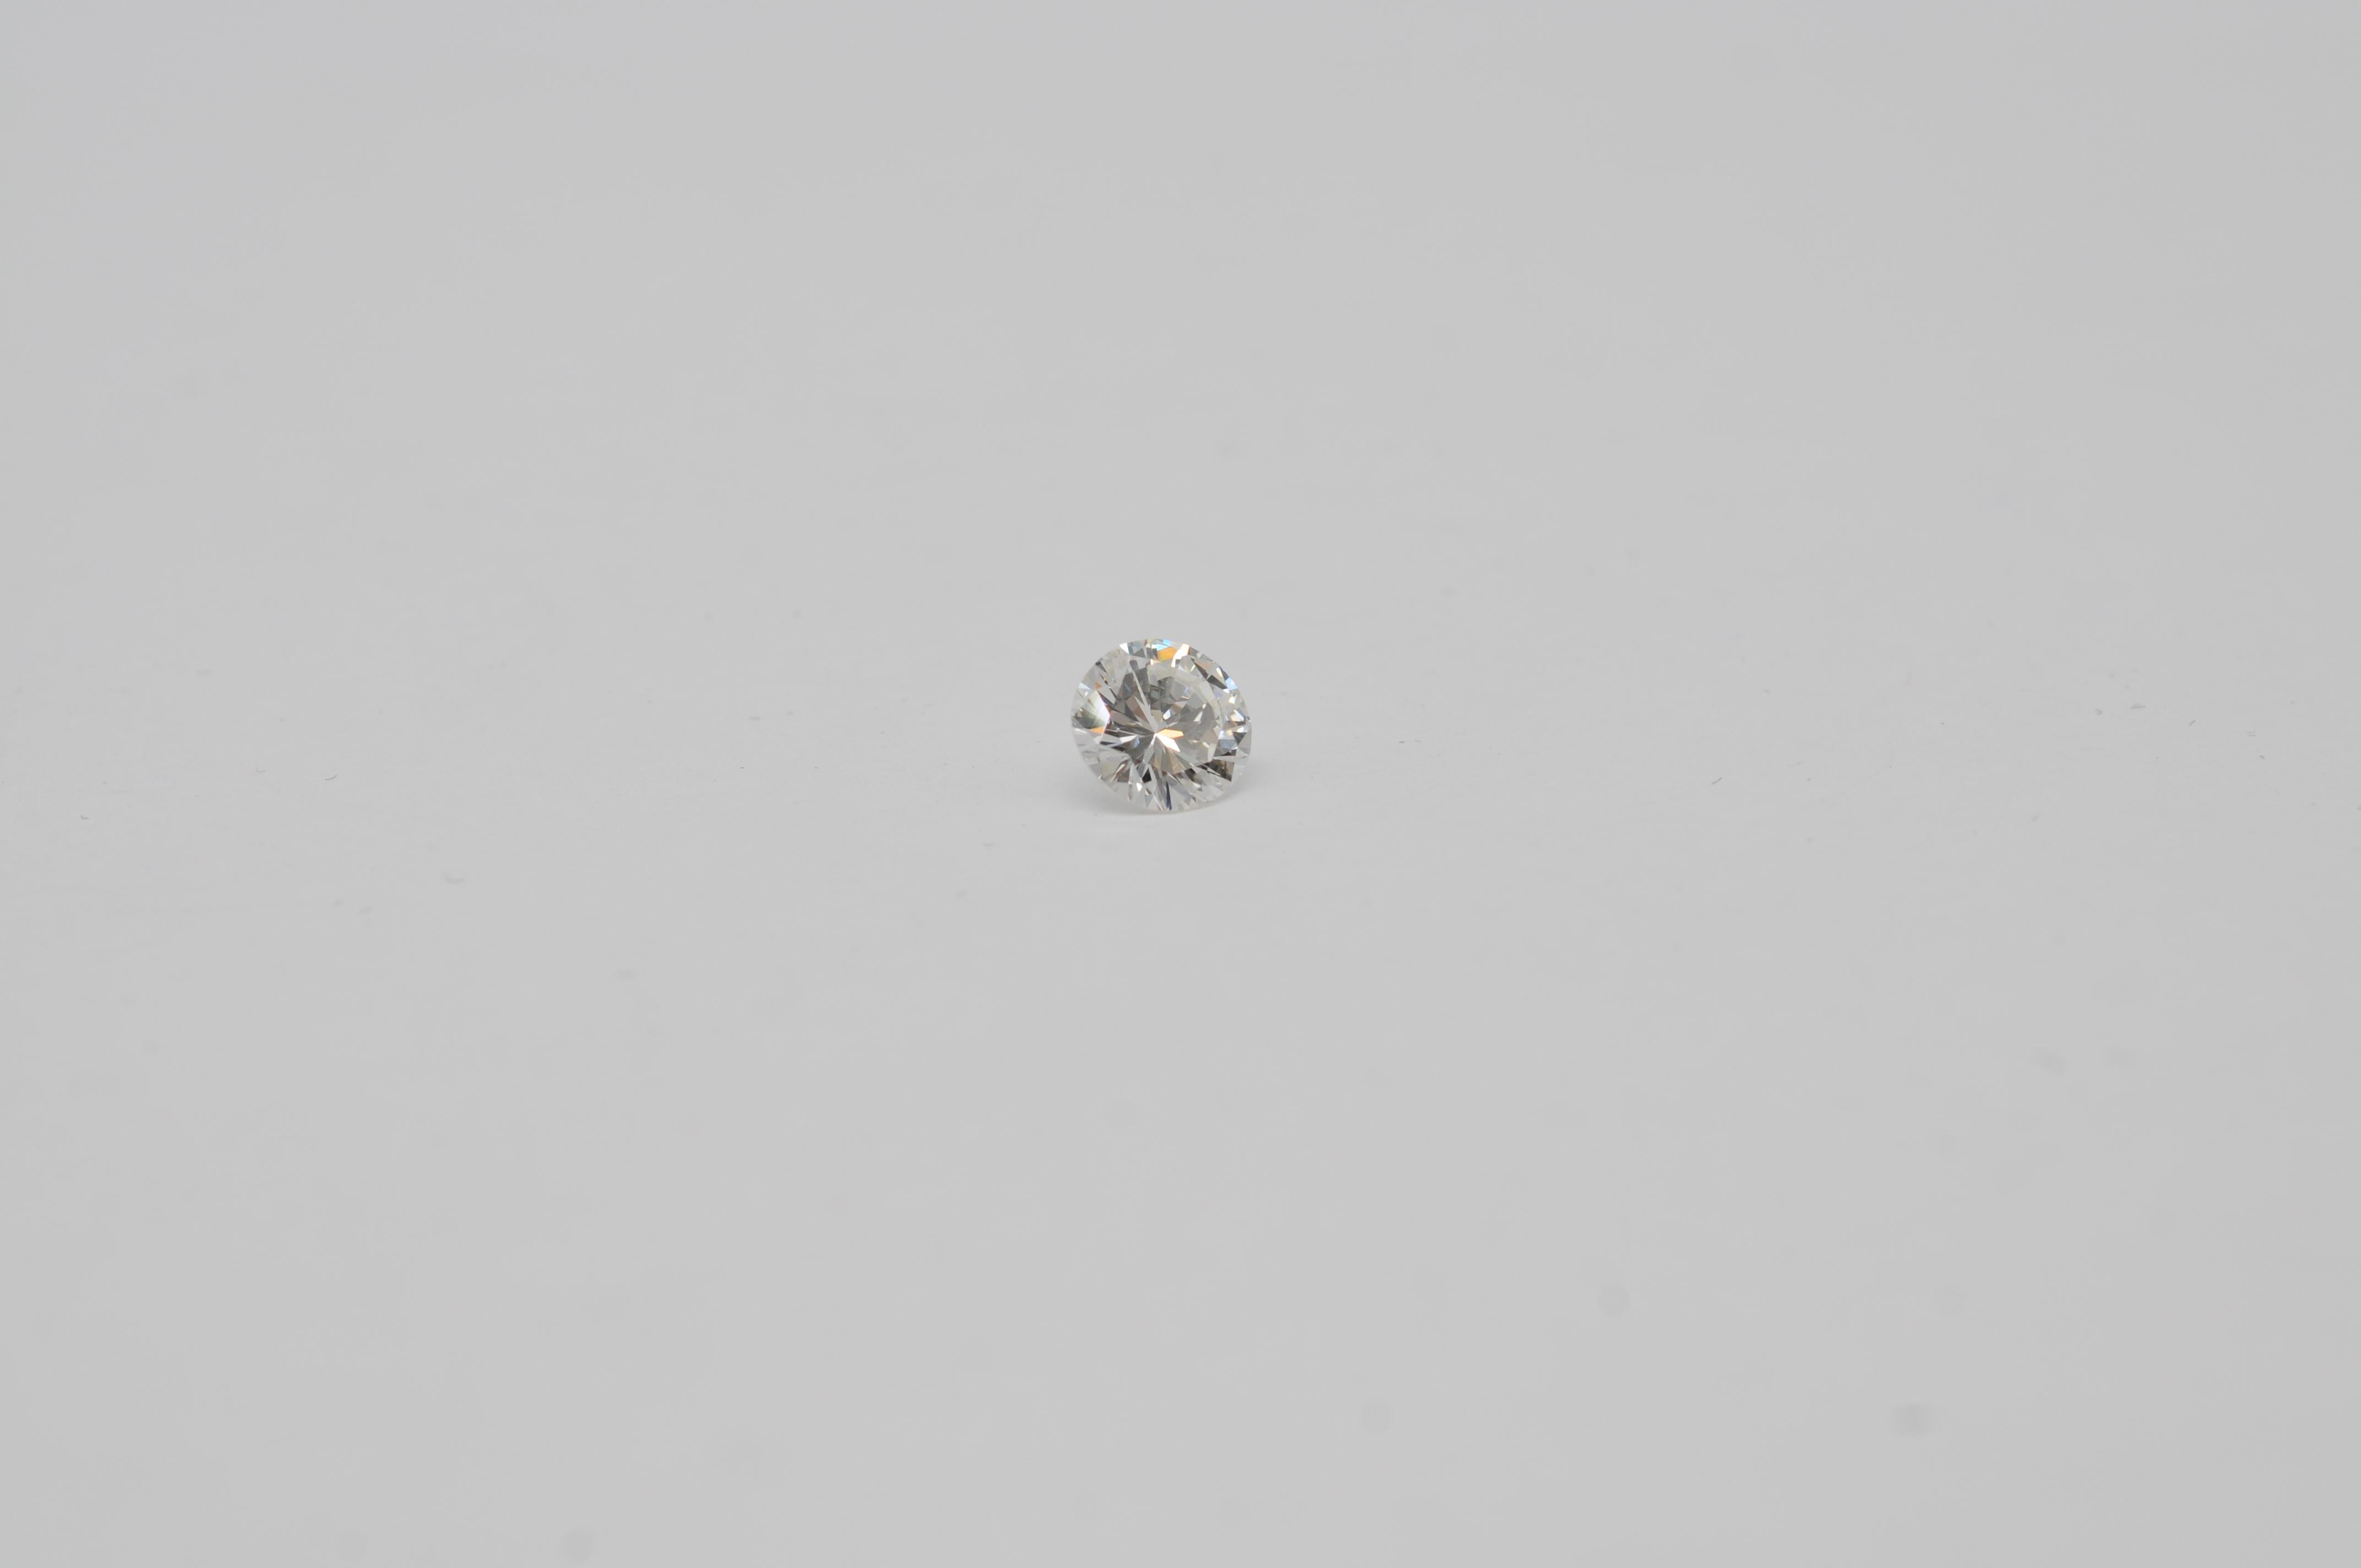 Aesthetic Movement  Diamond clarity:(IF) internally flawless color: top wesselton 1.06ct For Sale